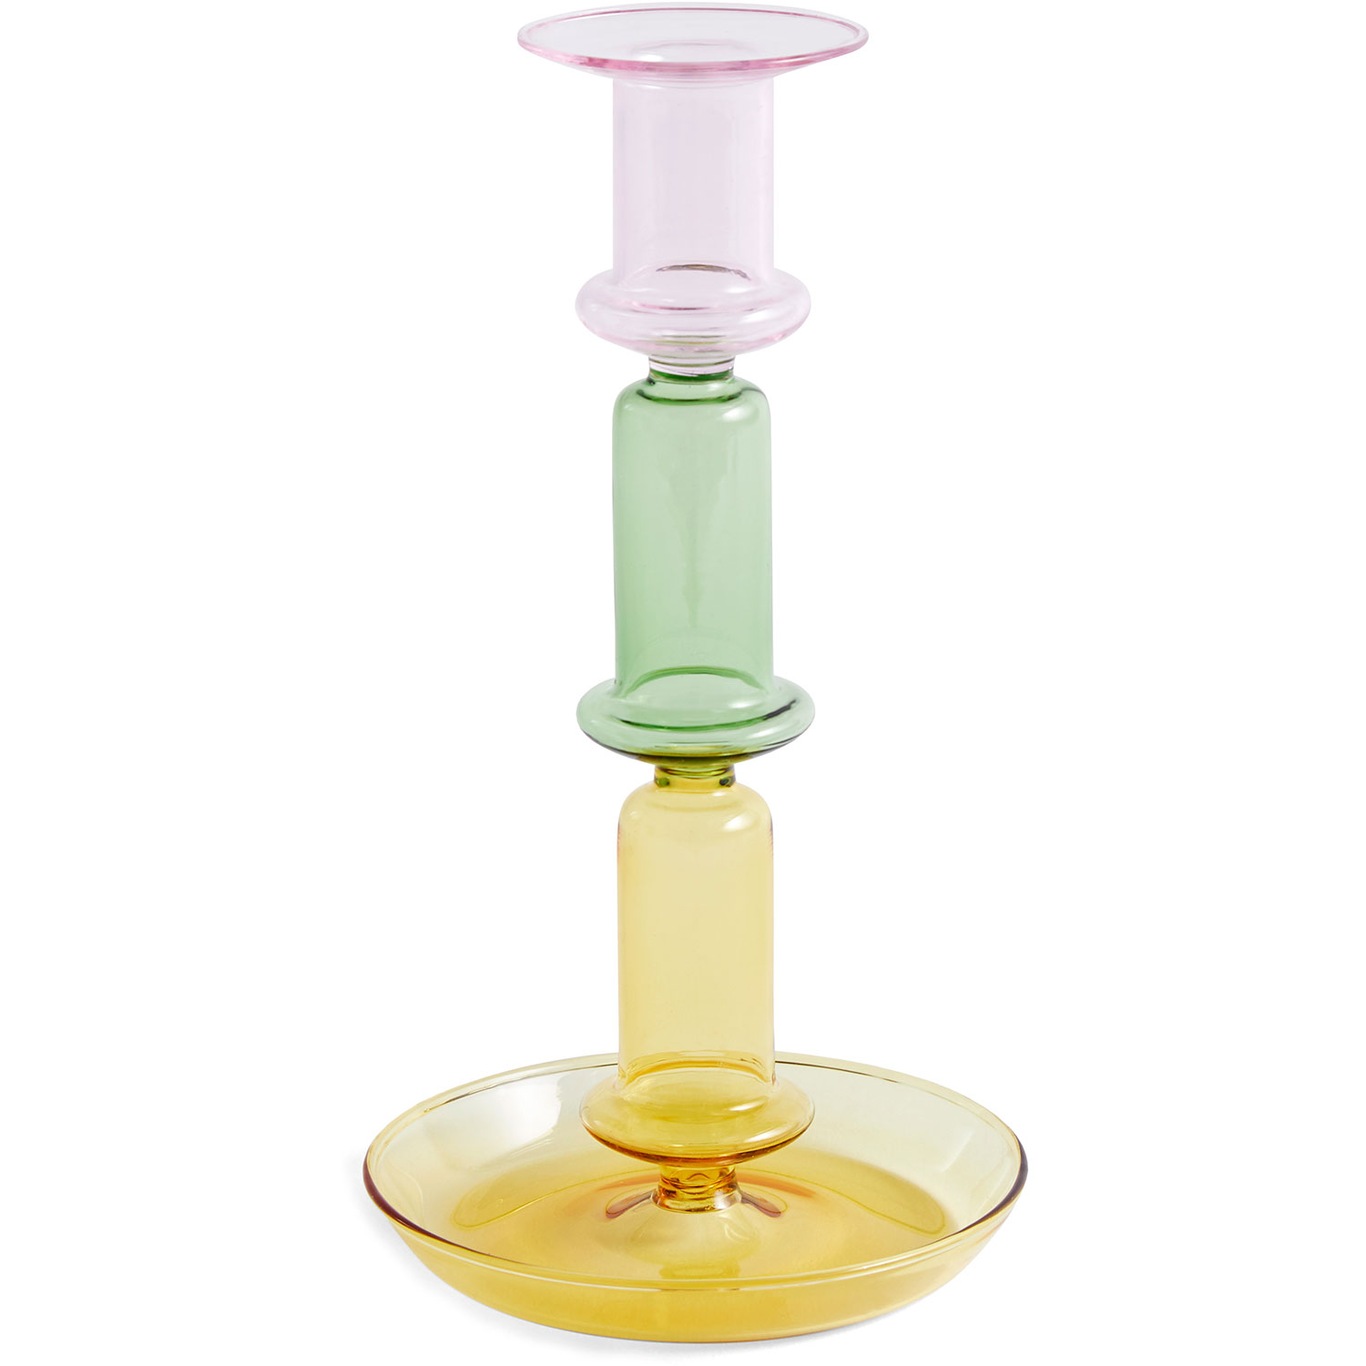 Flare Candlestick 21 cm Pink / Green / Yellow